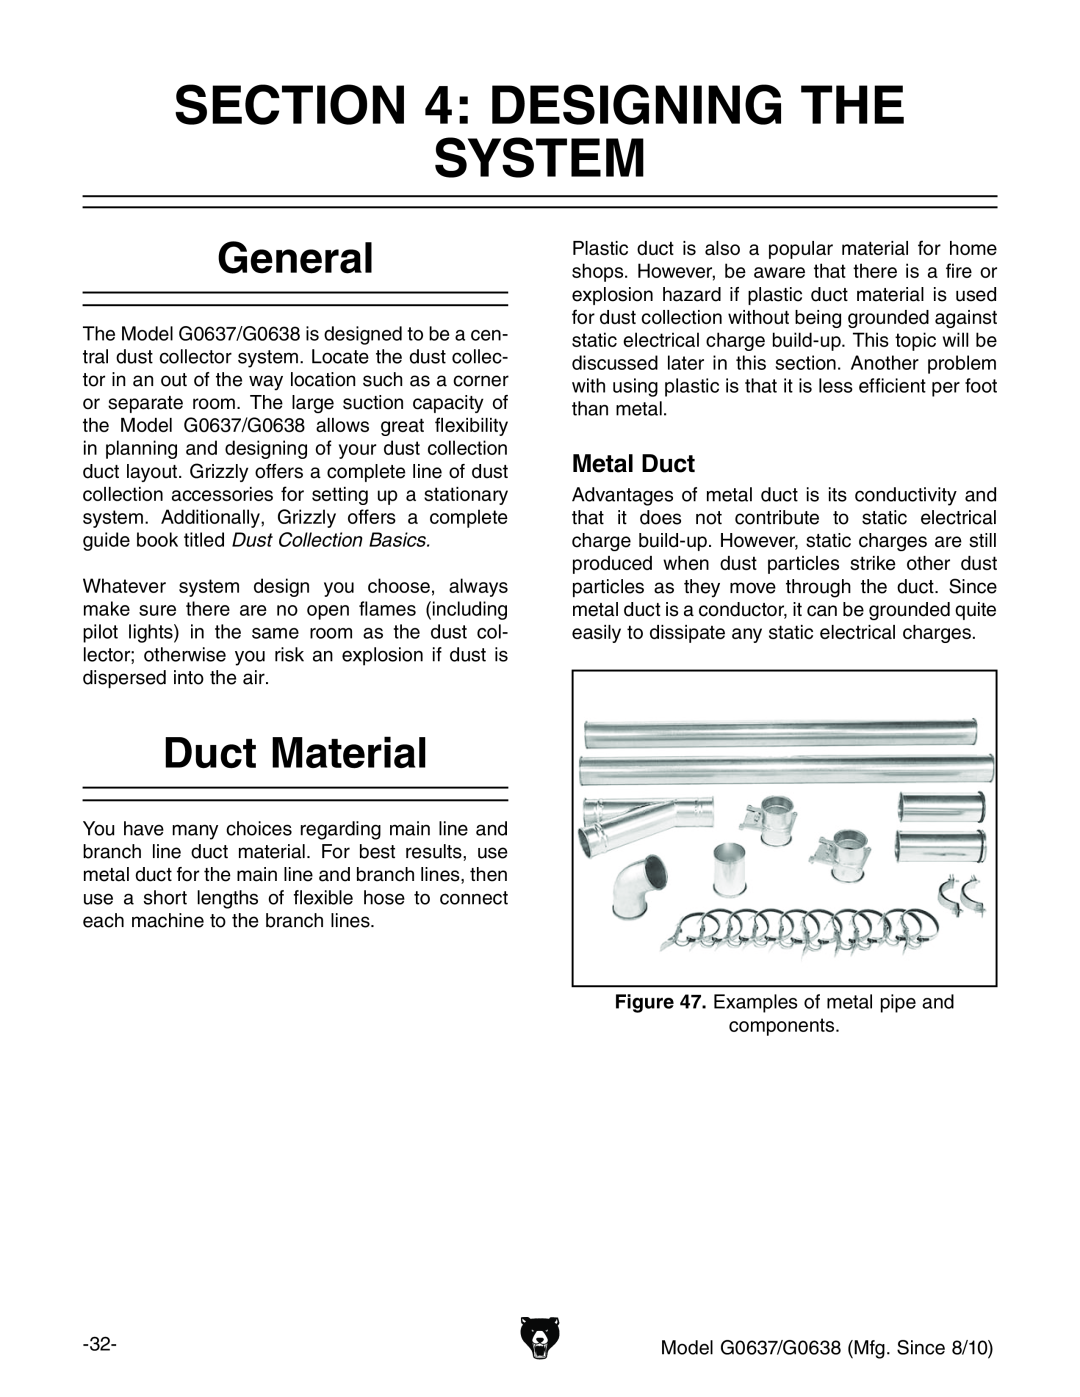 Grizzly G0637 owner manual Designing The System, General, Duct Material, Metal Duct, mVbeaZhdbZiVae^eZVcY XdbedcZcih# 